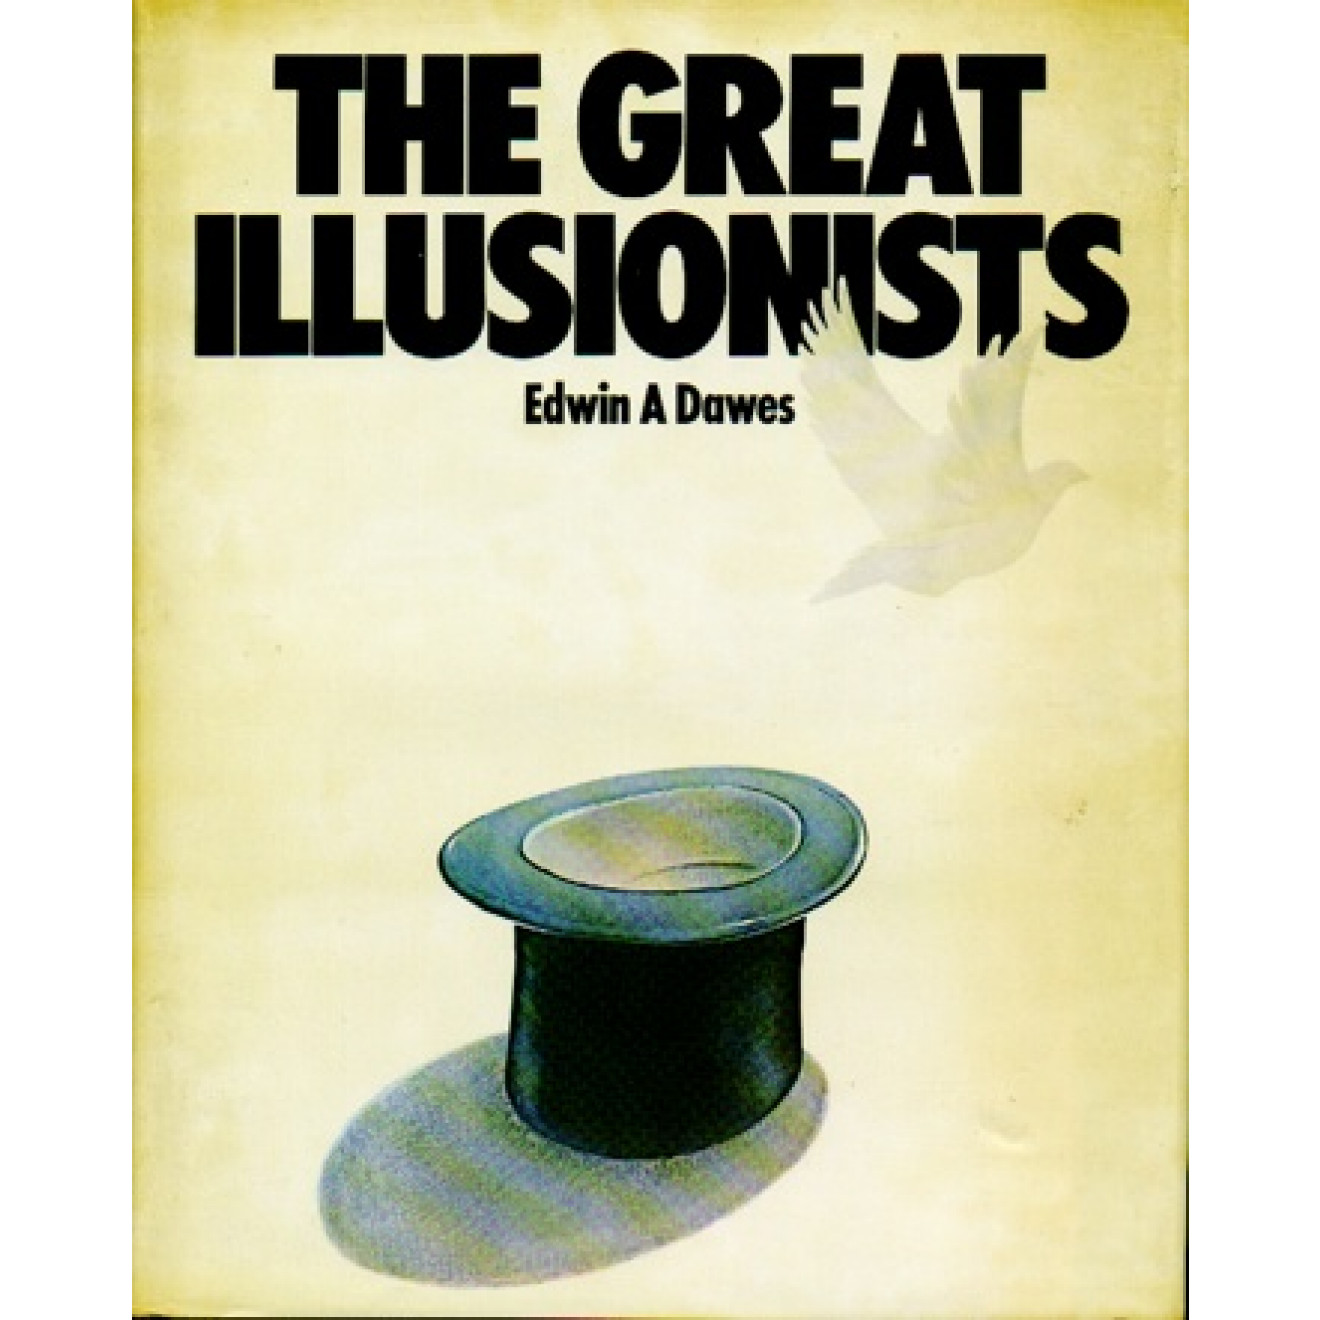 The Great Illusionists